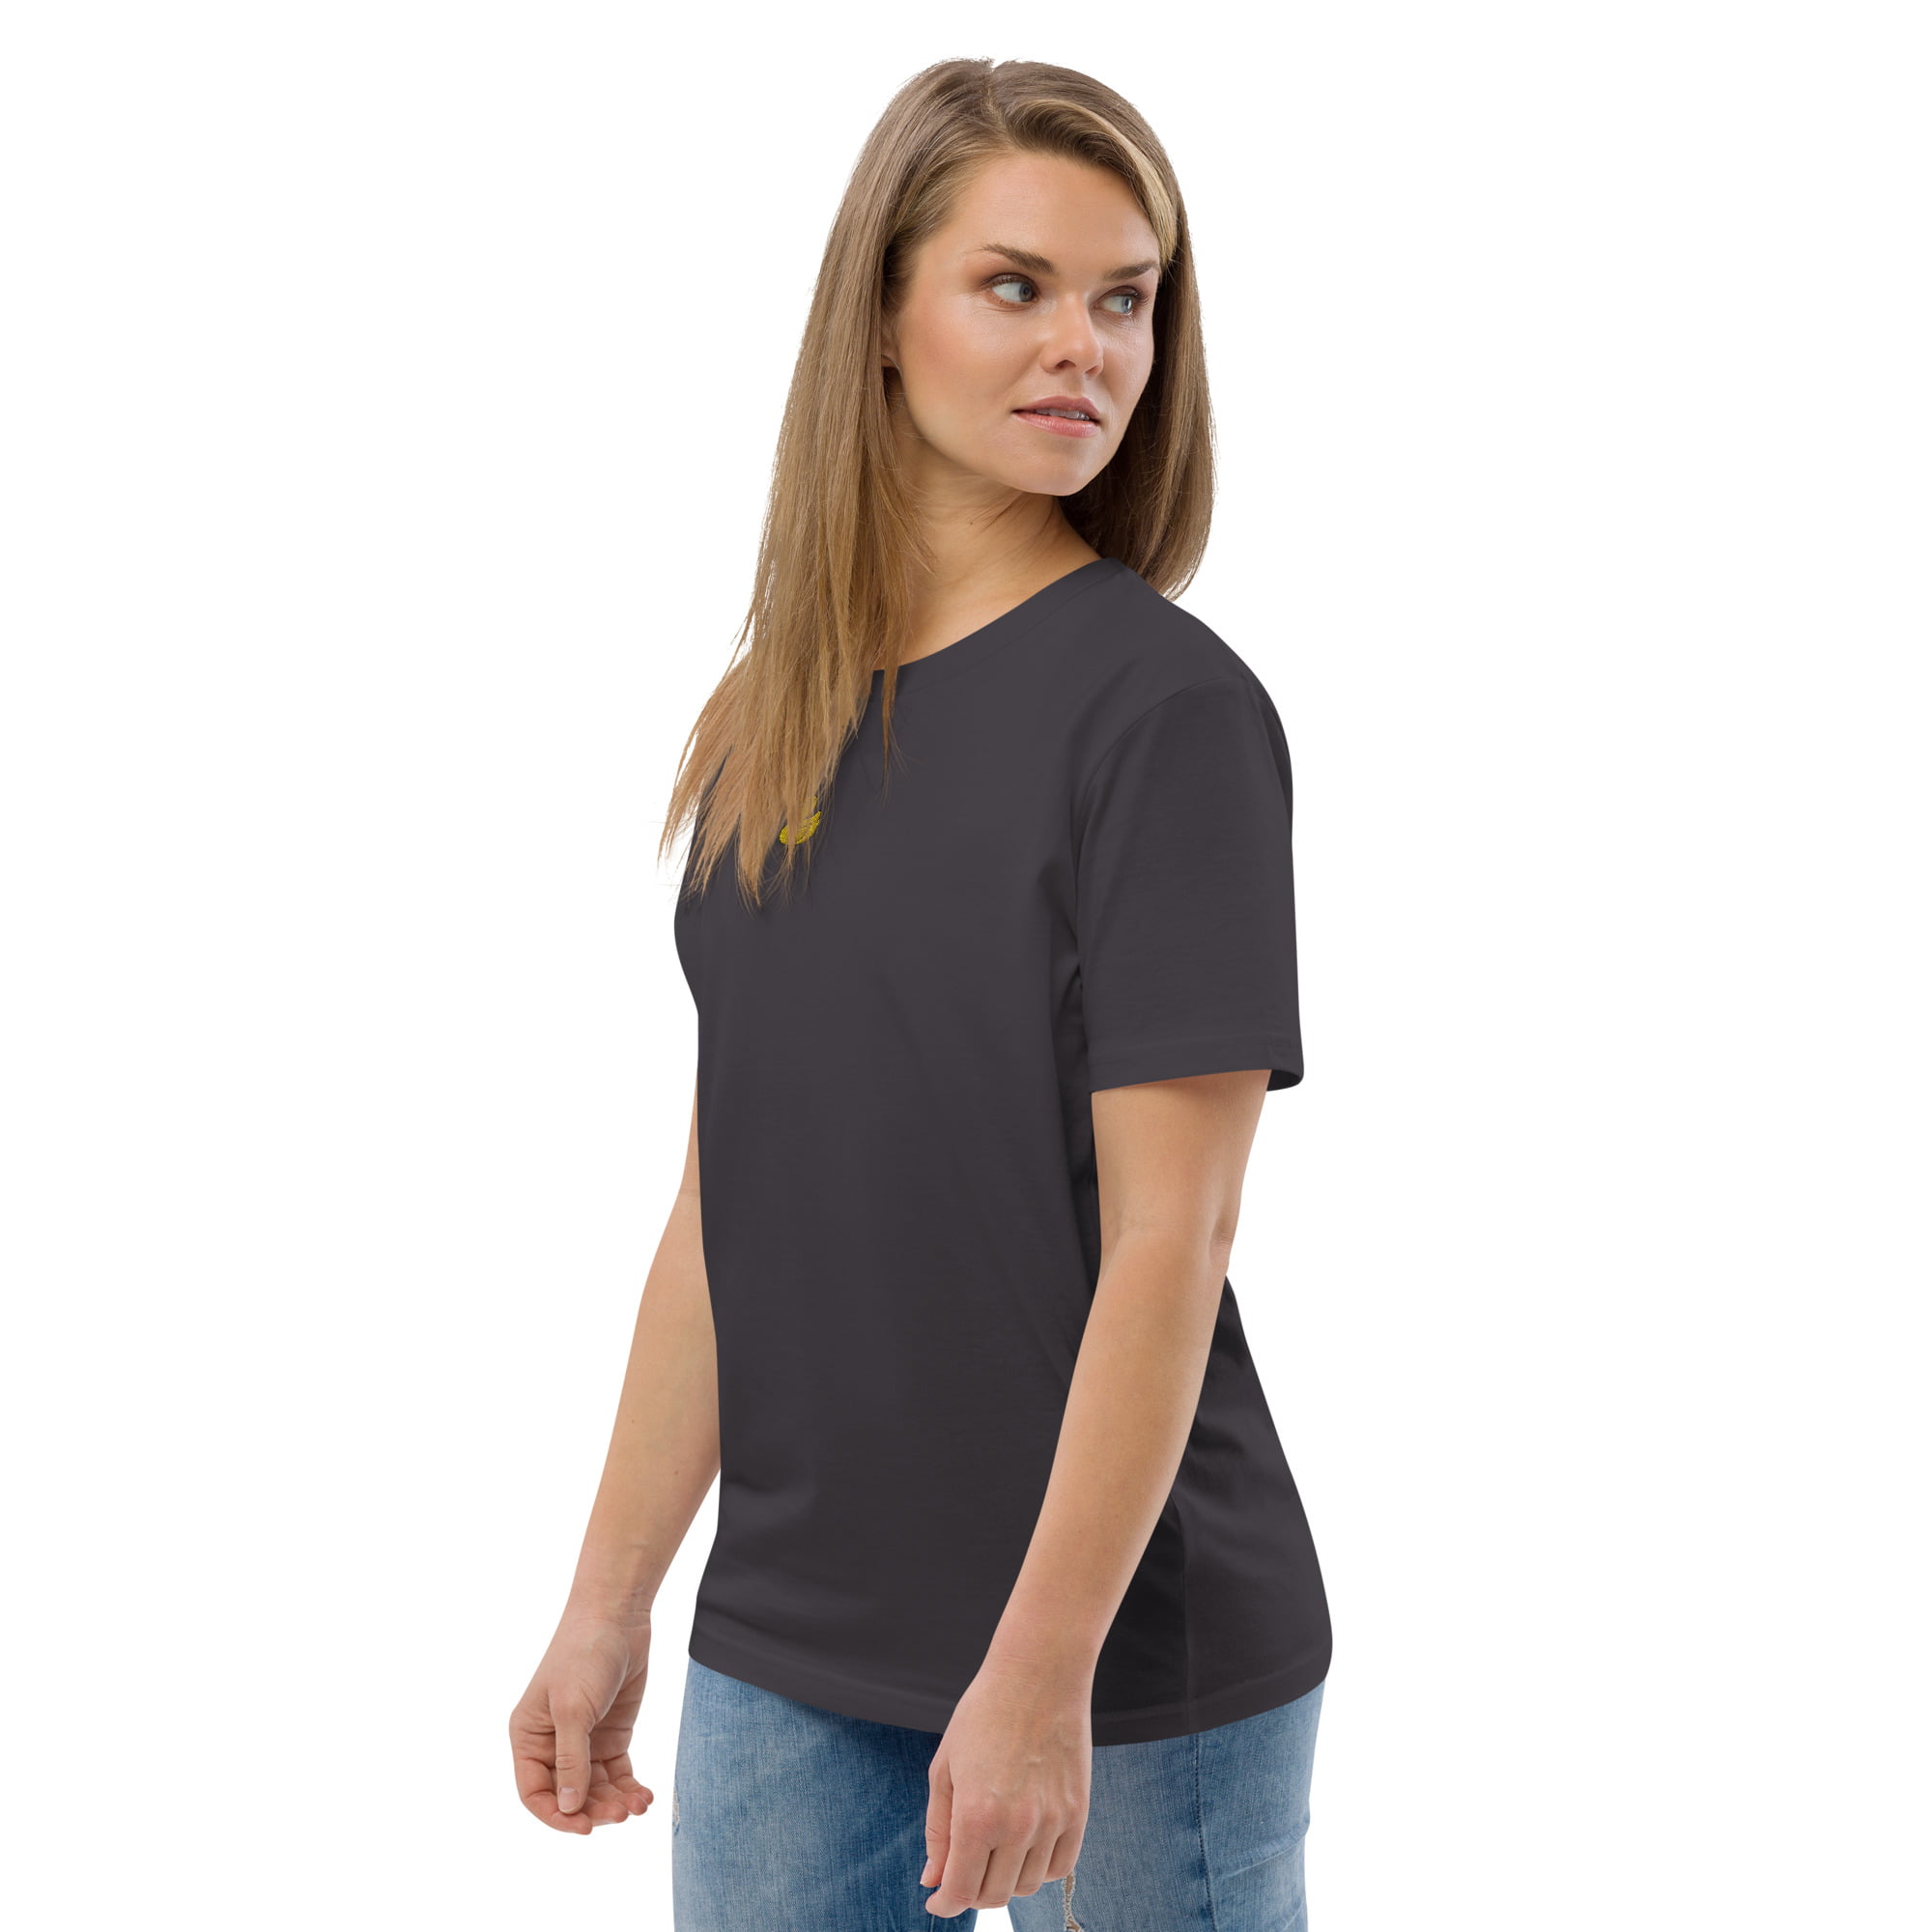 unisex organic cotton t shirt anthracite left front 64771debe860a